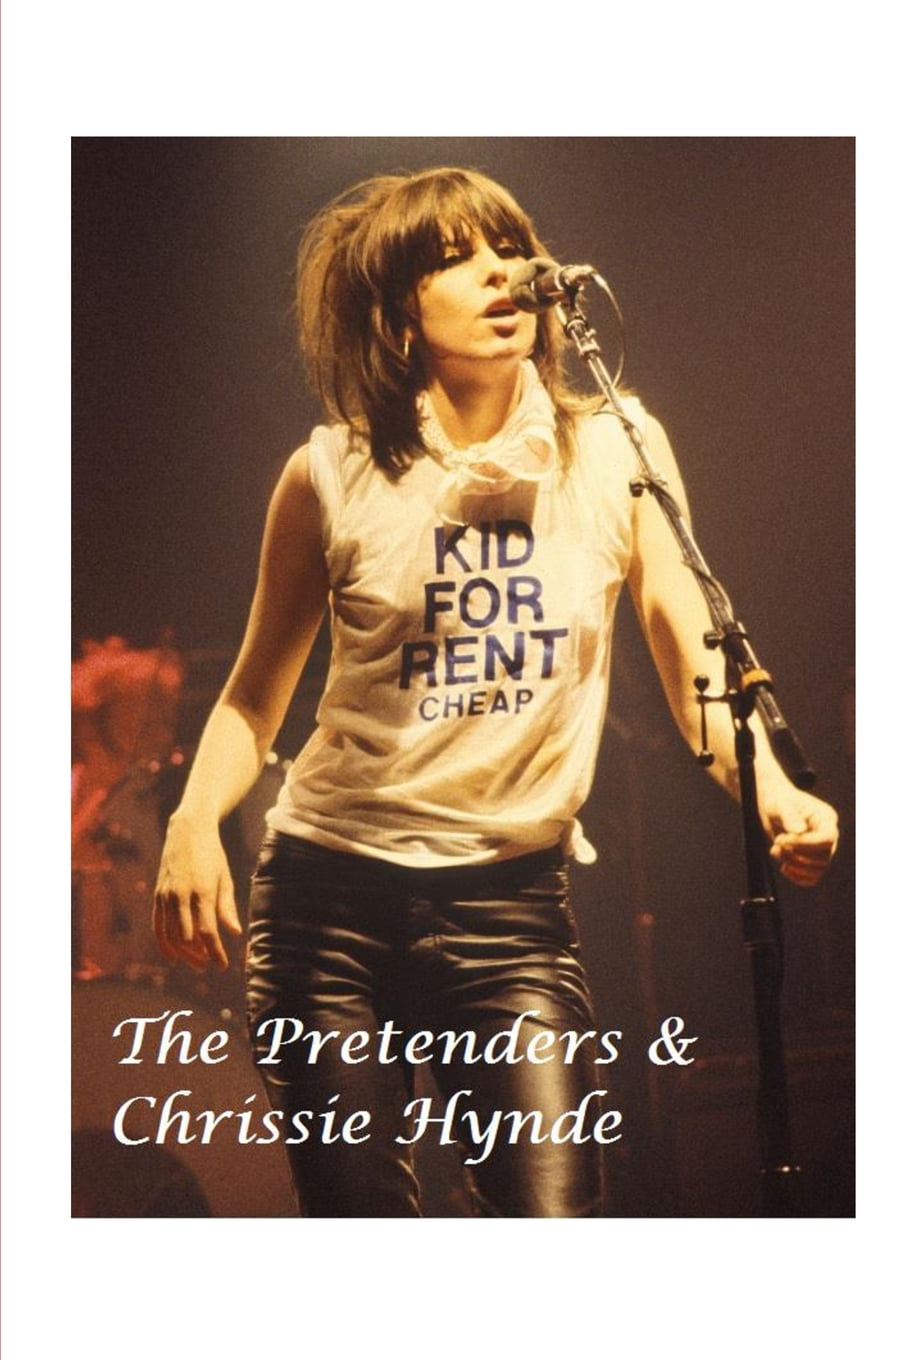 The Pretenders and Chrissie Hynde (Paperback) - Walmart.com